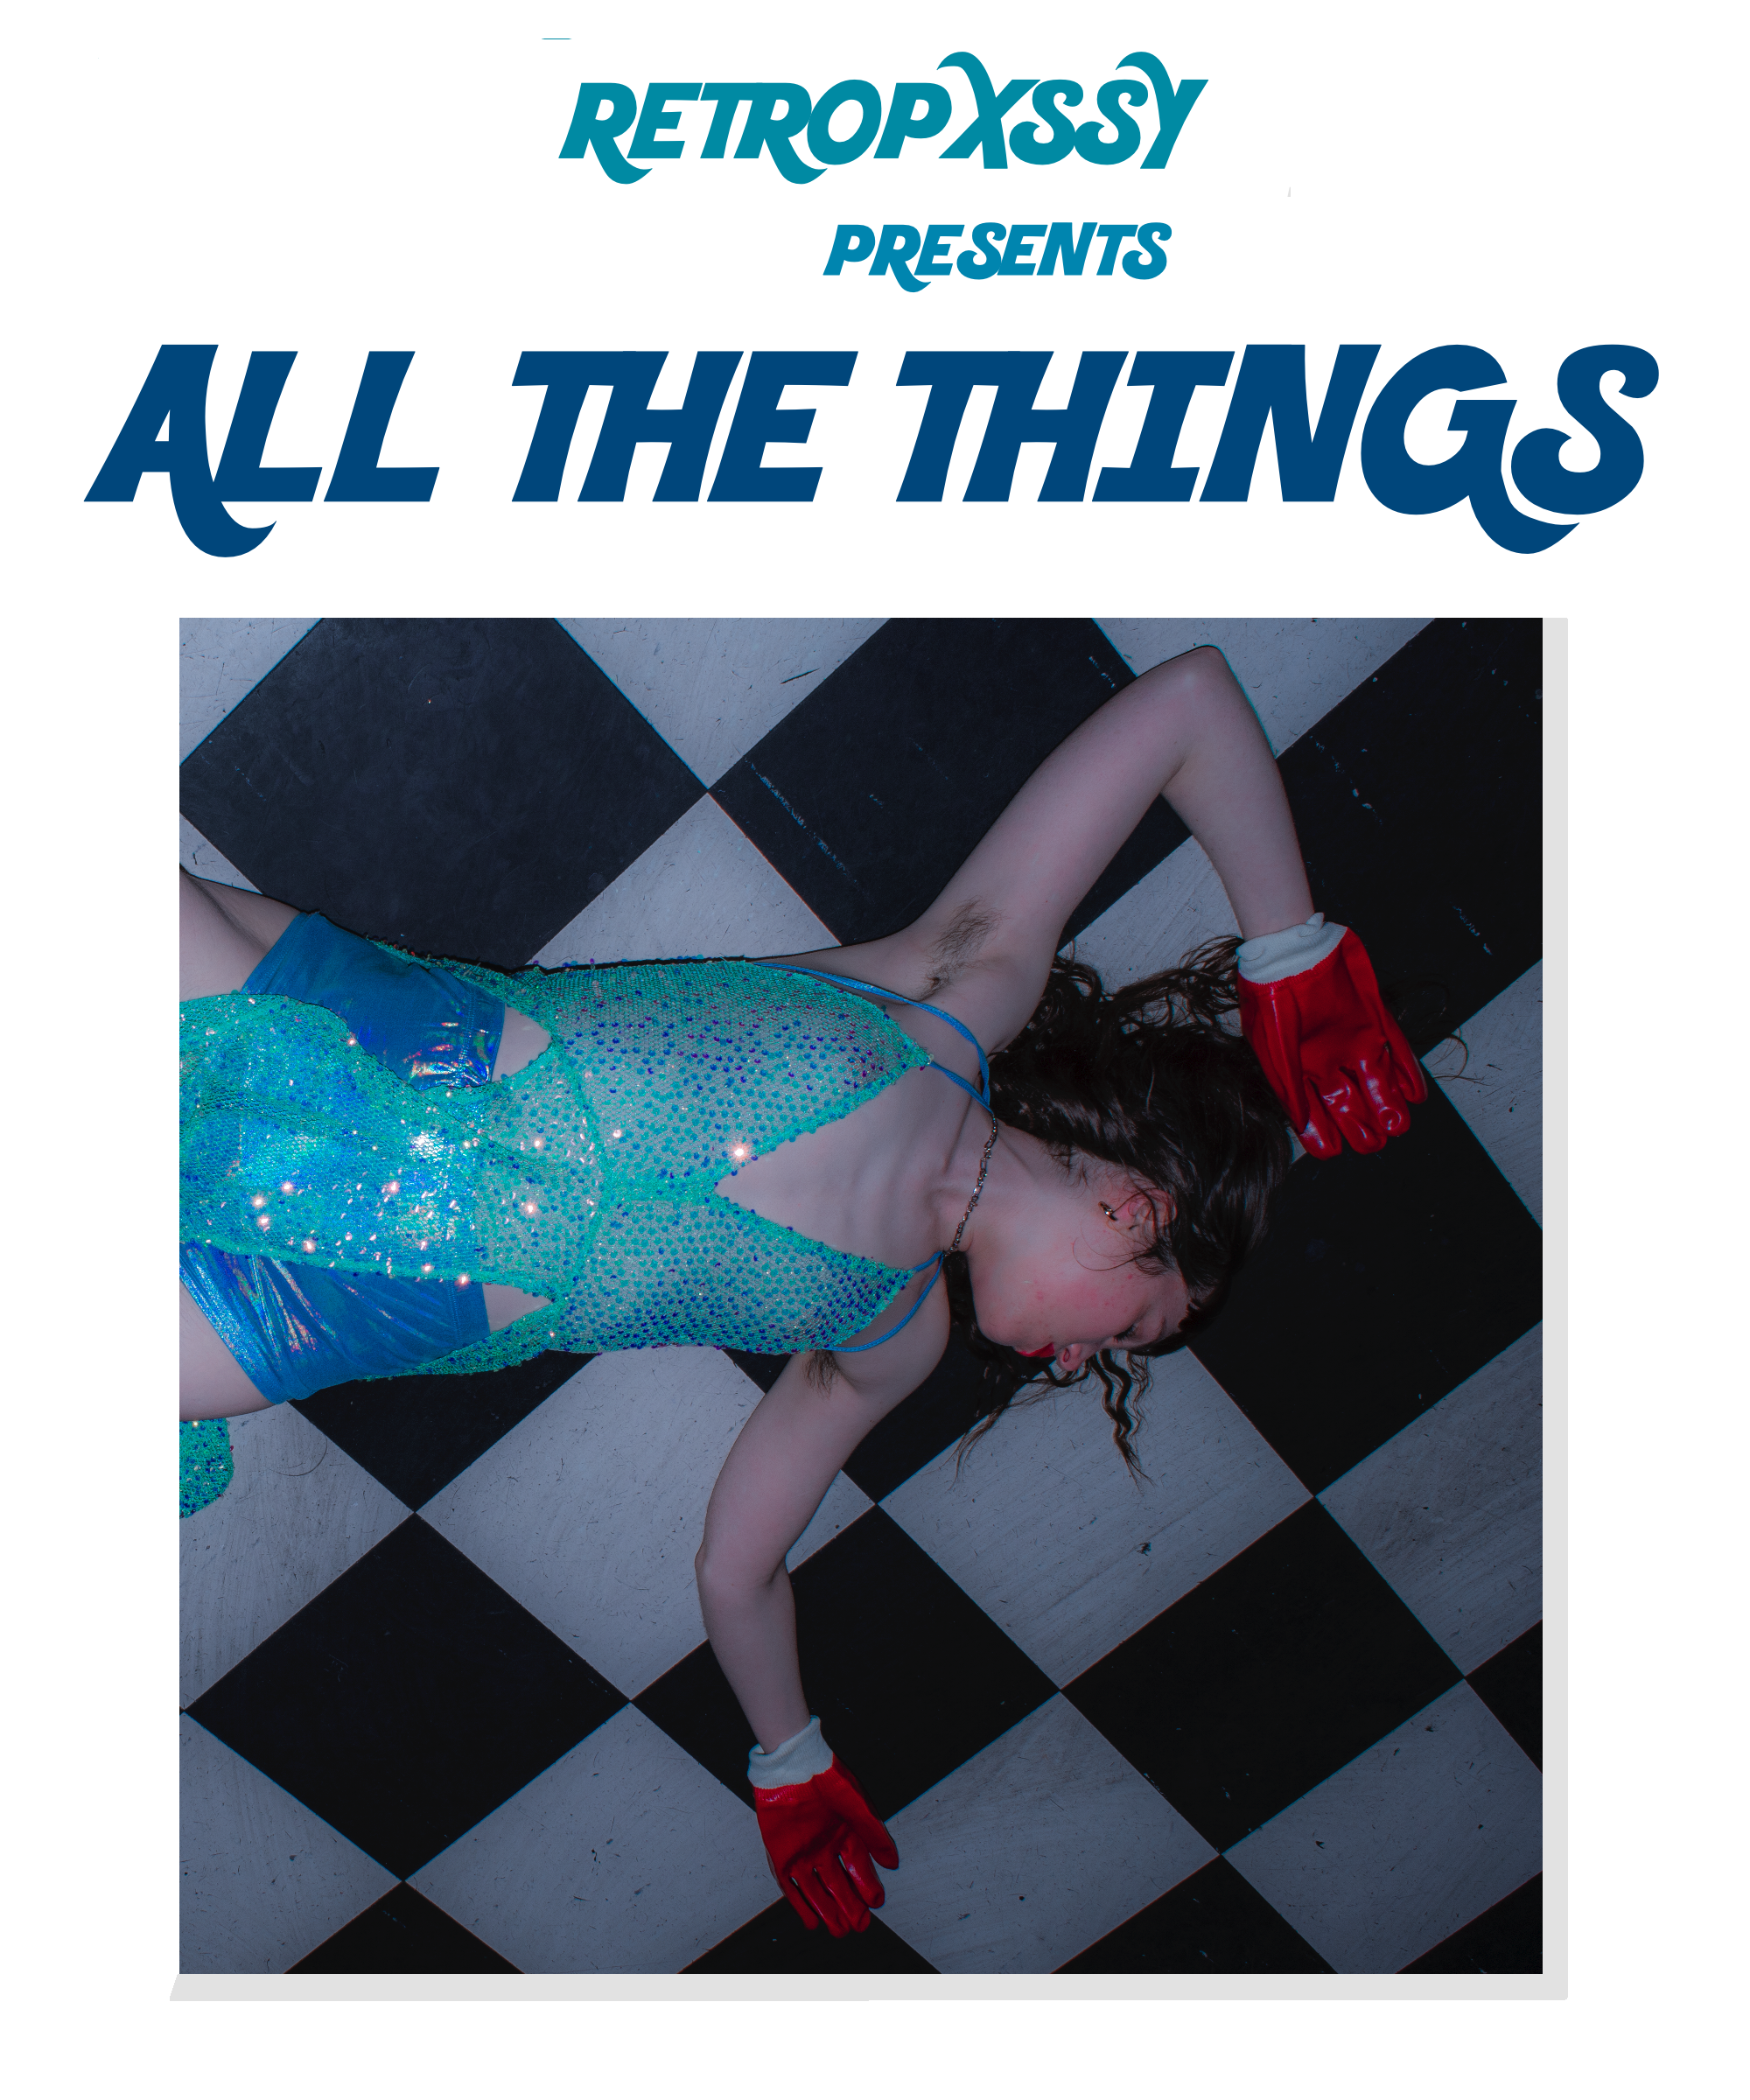 London Rapper Retropxssy Has "All the Things"